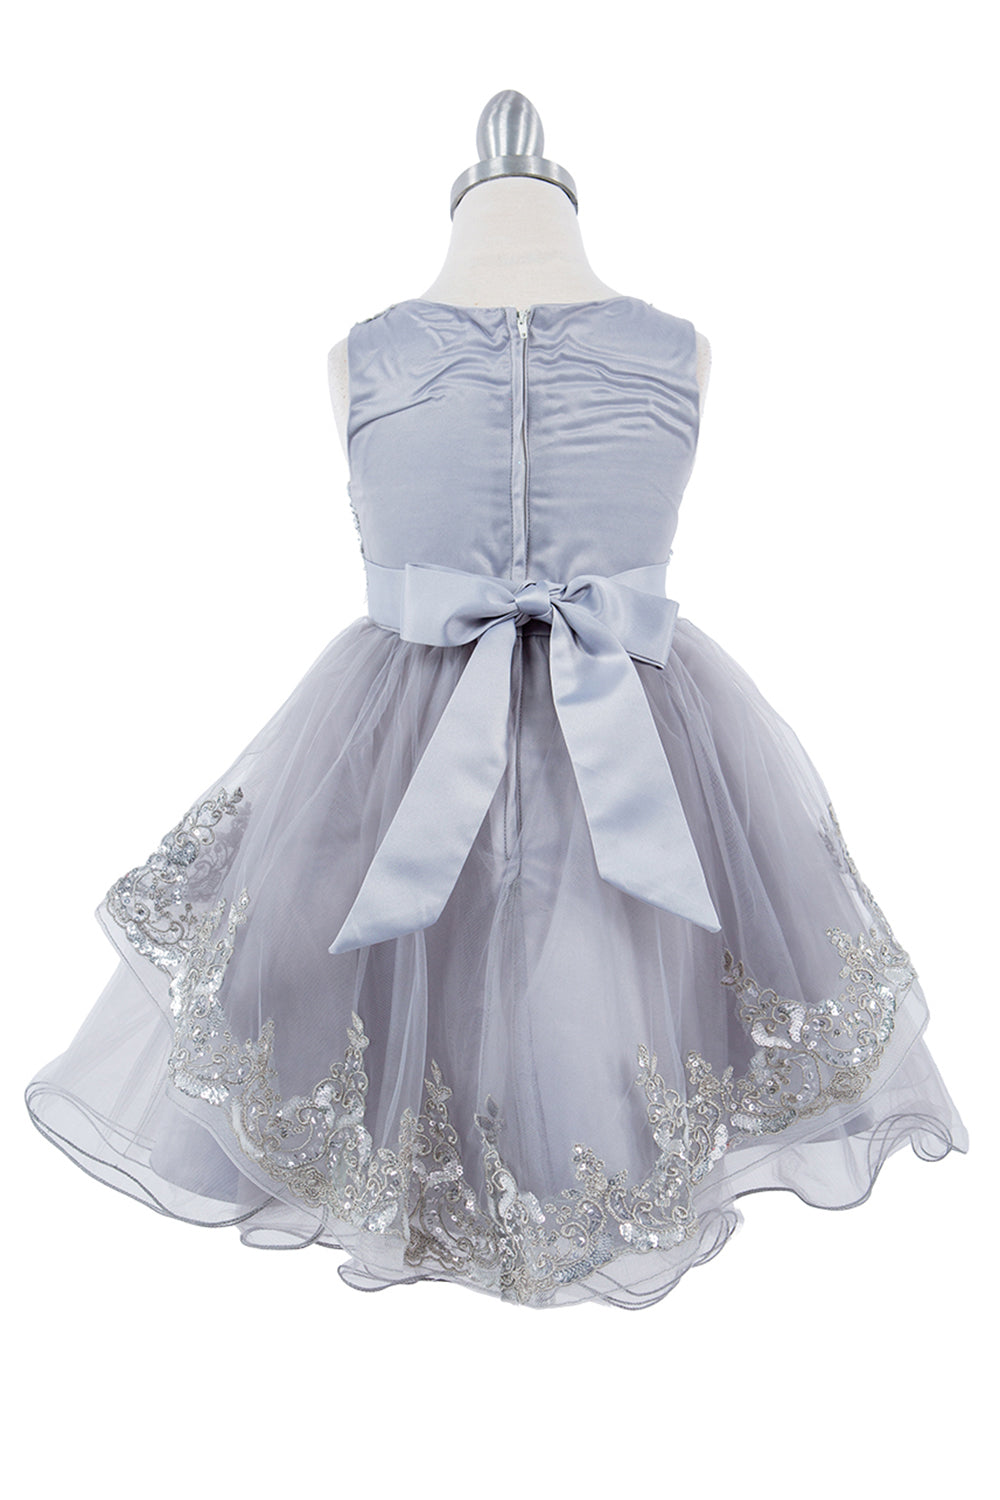 Decorated With Sequin Flowers Elegant Sleeveless Lace Kids Dress CU9132 Elsy Style Ball Gown